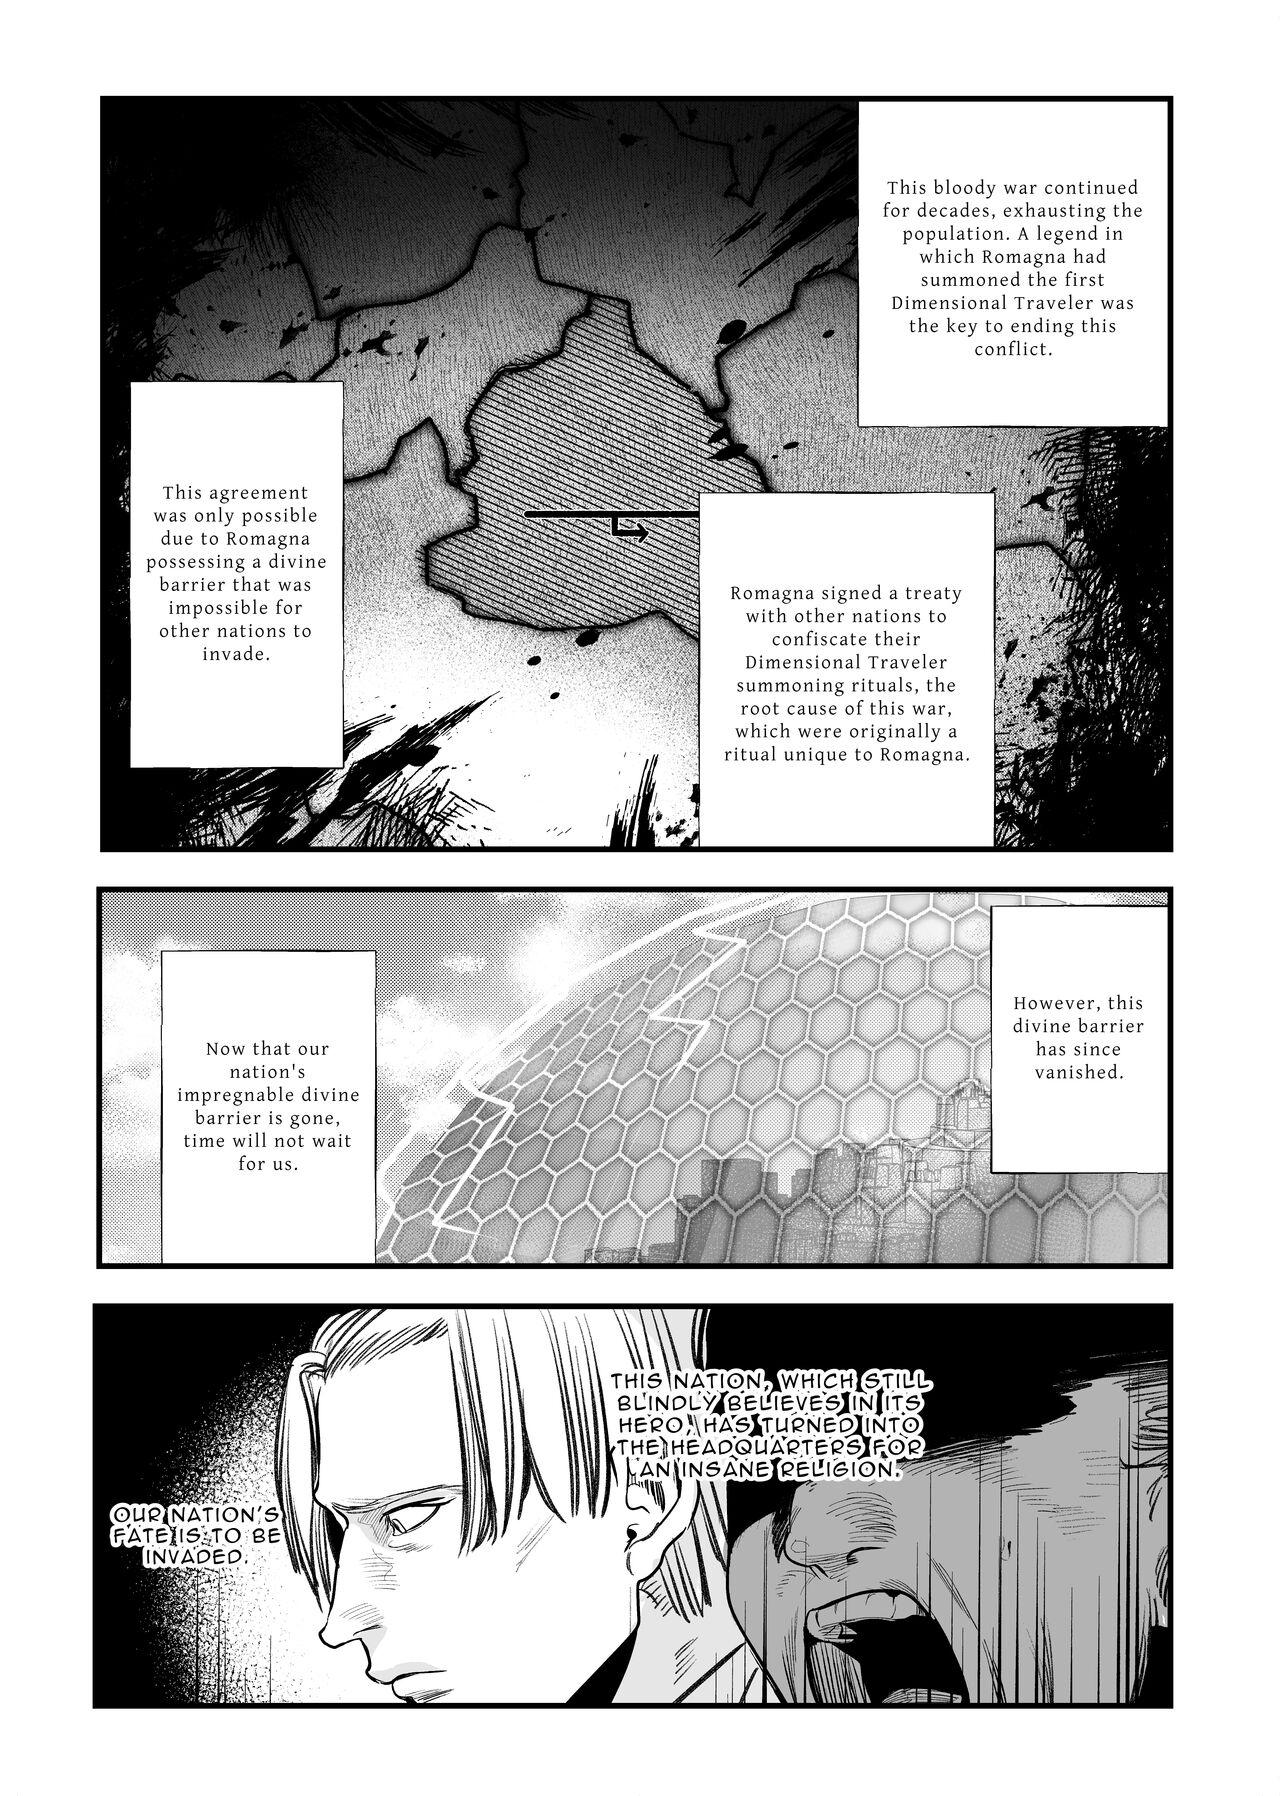 Hotel The Man Who Saved Me on my Isekai Trip was a Killer... 2 - Original Clothed Sex - Page 7